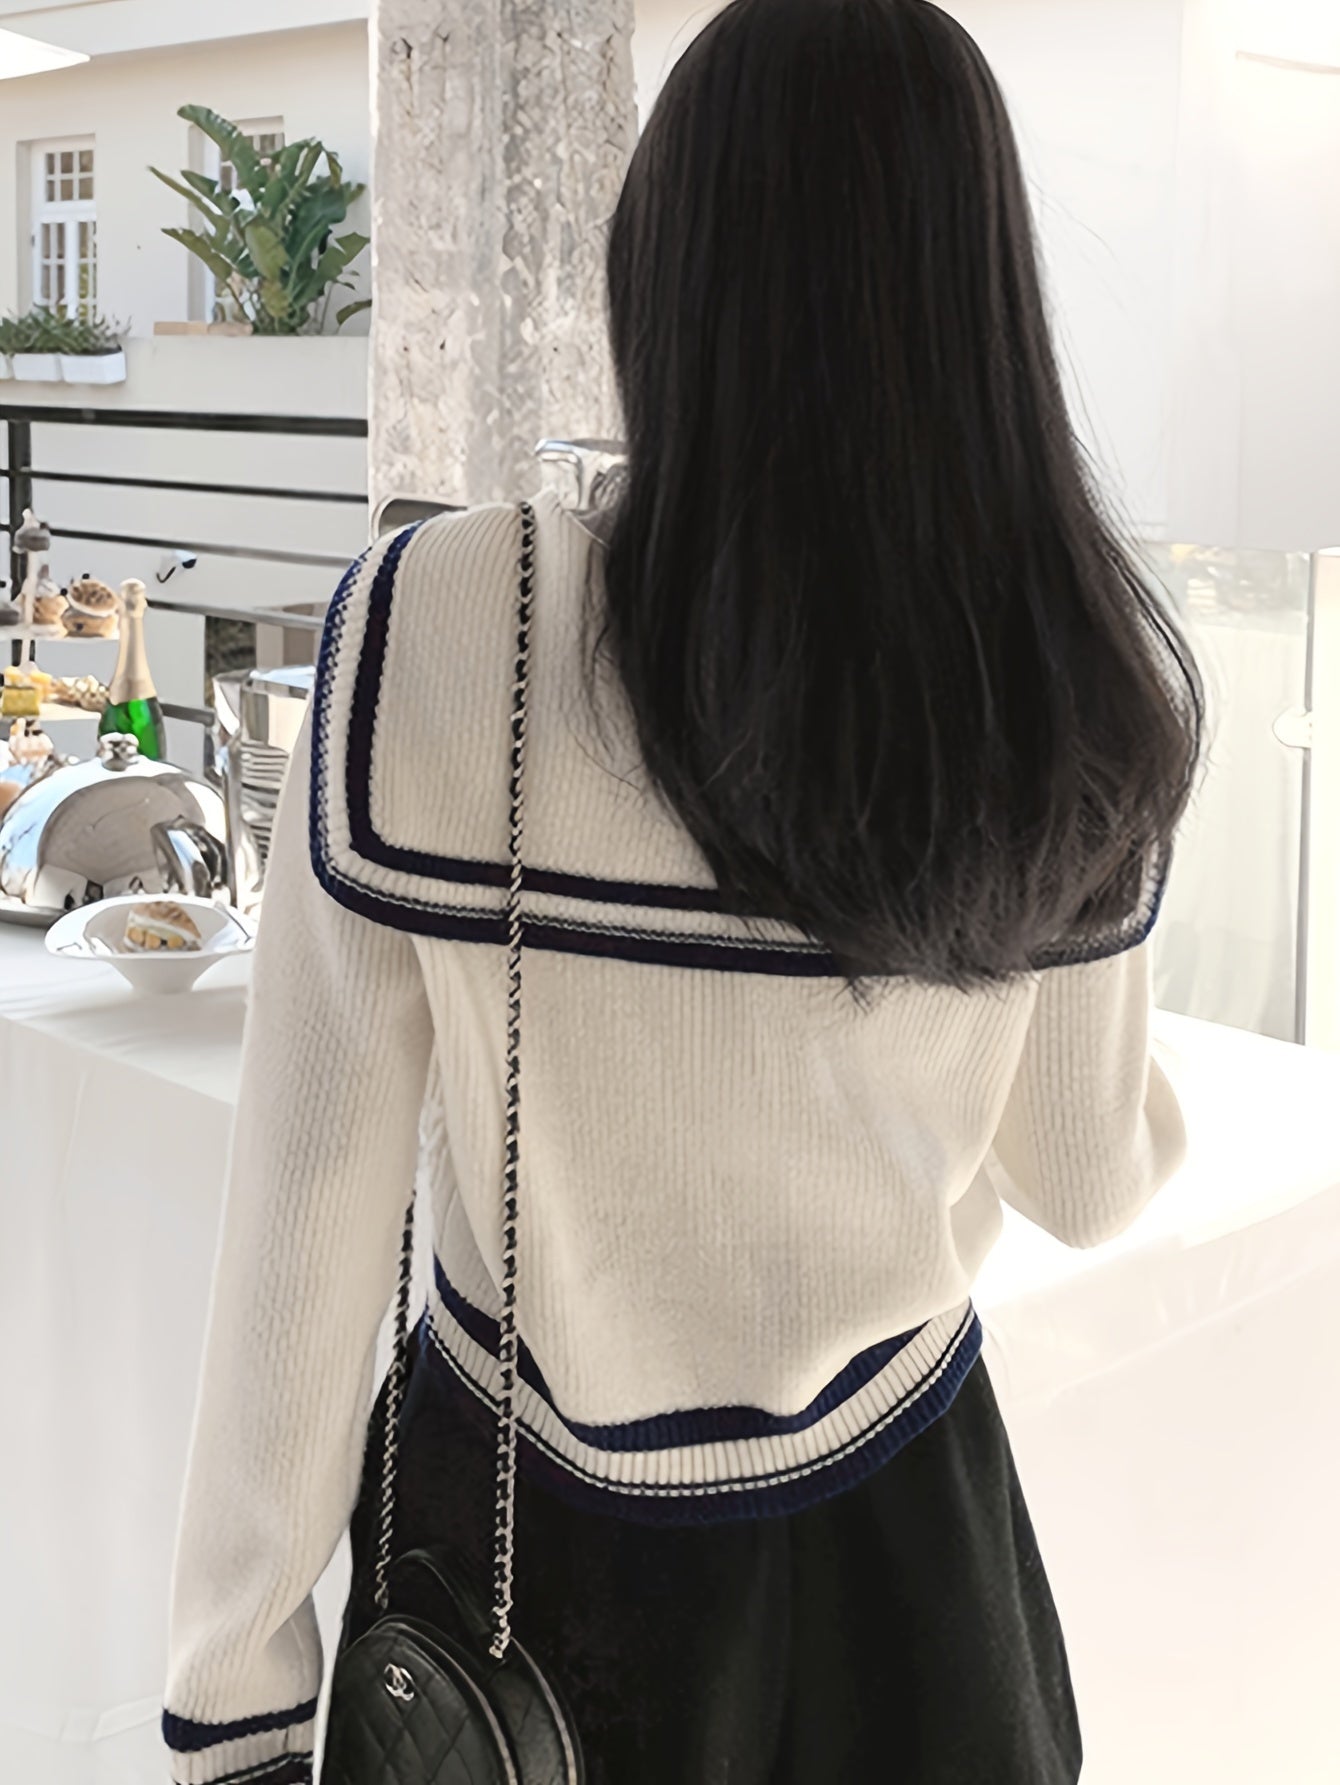 Antmvs Striped Button Down Cable Knit Cardigan, Elegant Collared Long Sleeve Preppy Style Sweater, Women's Clothing